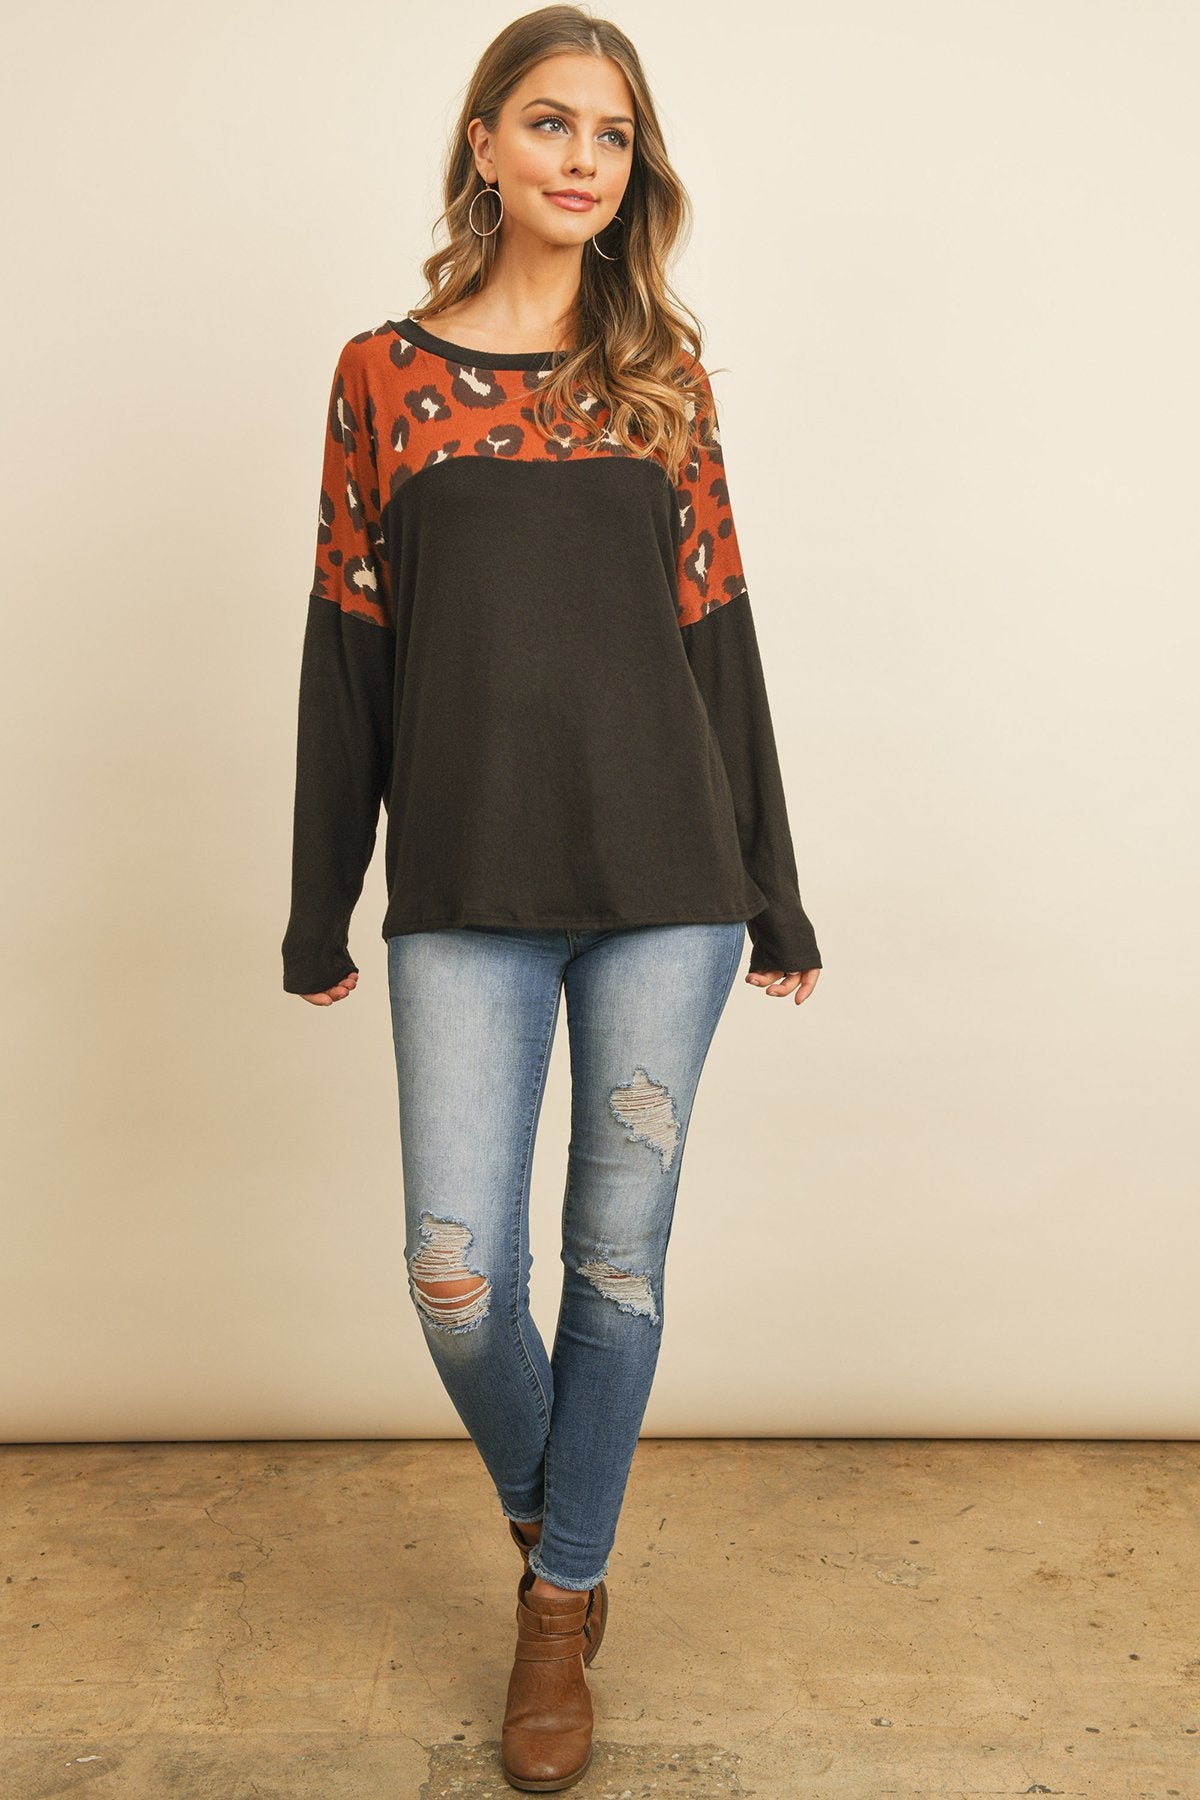 Long Sleeve Leopard Contrast Hacci Brushed Top